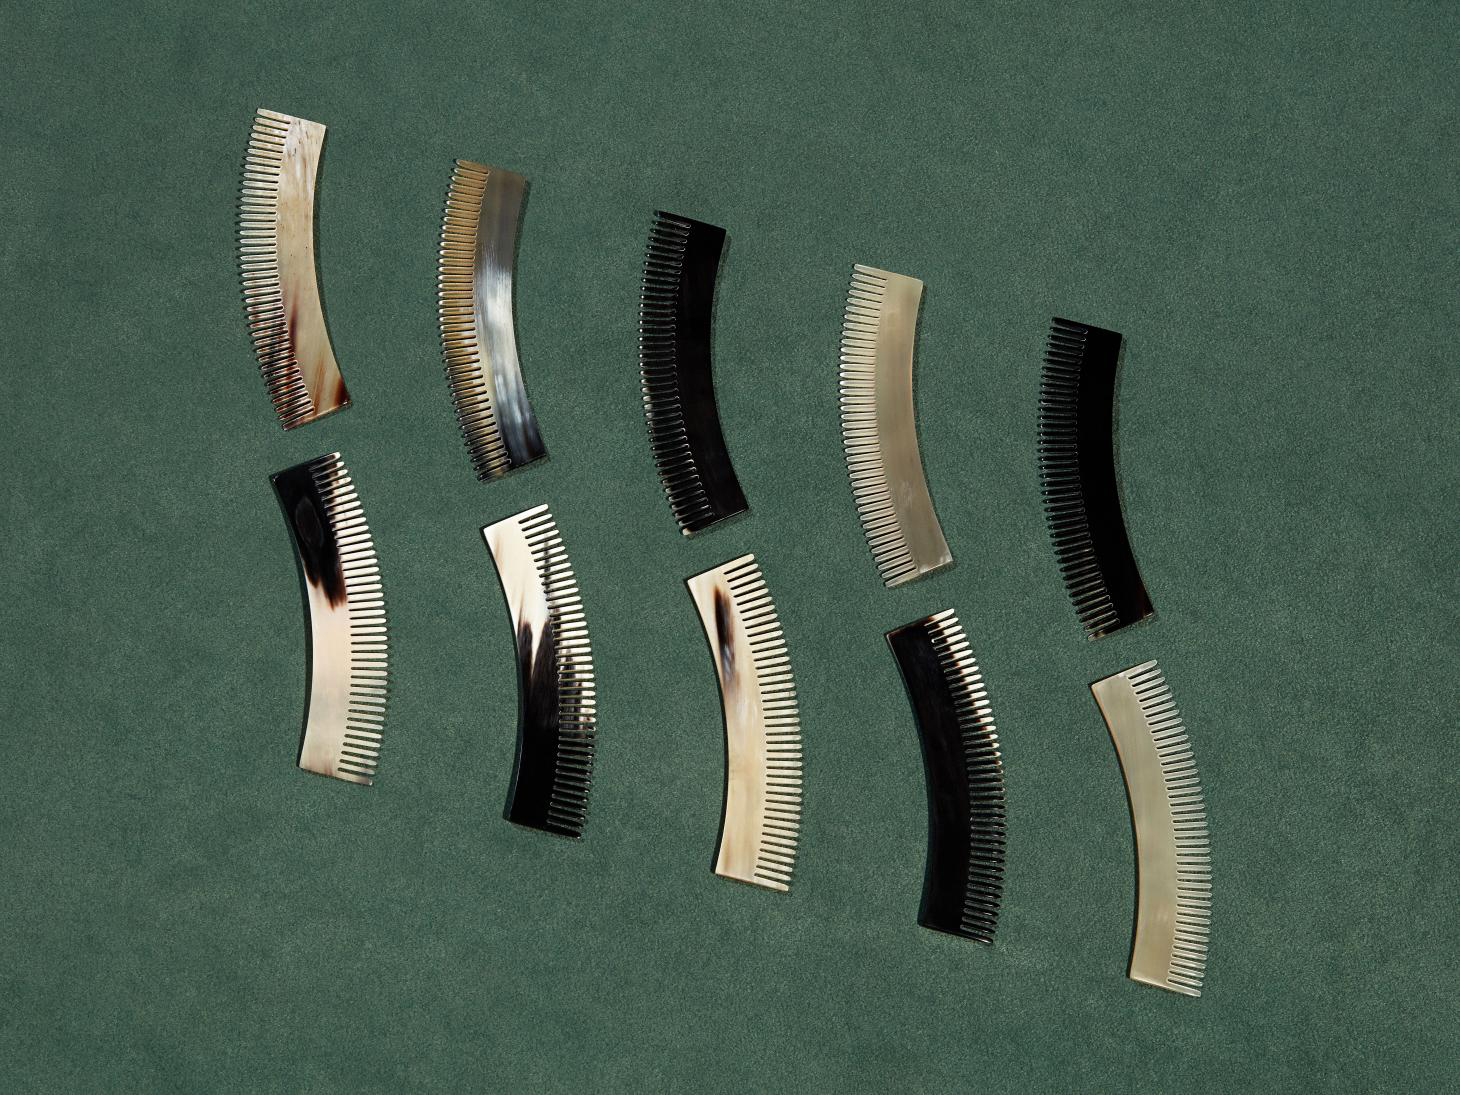 'Grand Hers' combs by Aurore Piedgrossi, shortlisted for Best Grooming Product, Wallpaper* Design Awards 2022